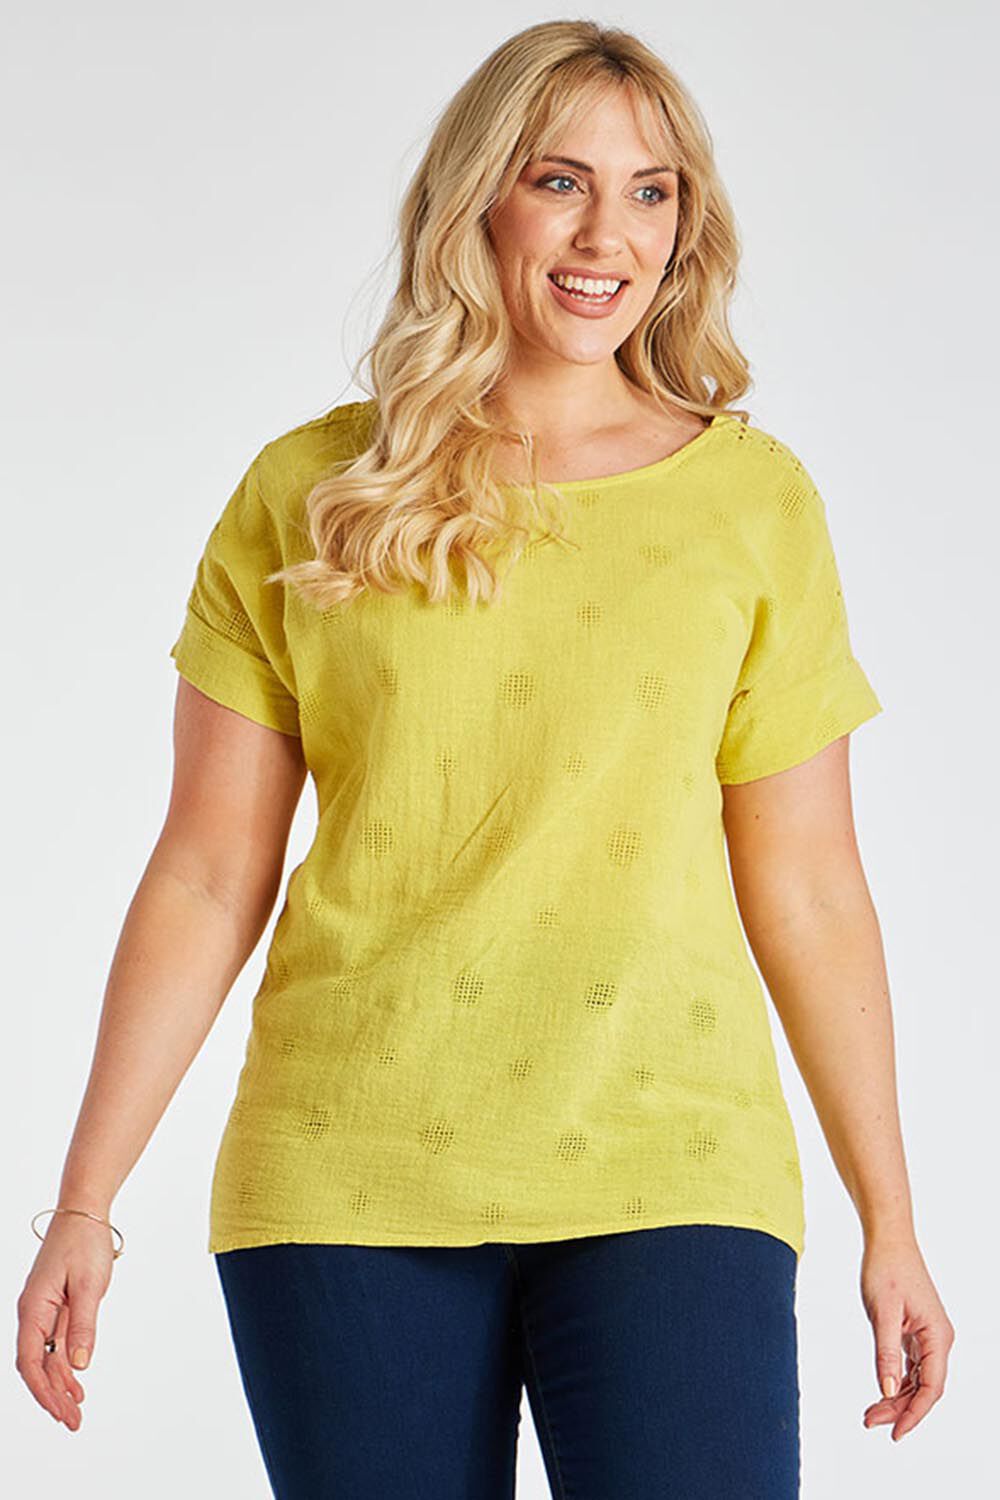 Bonmarche Lime Short Sleeve Textured Linen Look Shell Top, Size: M